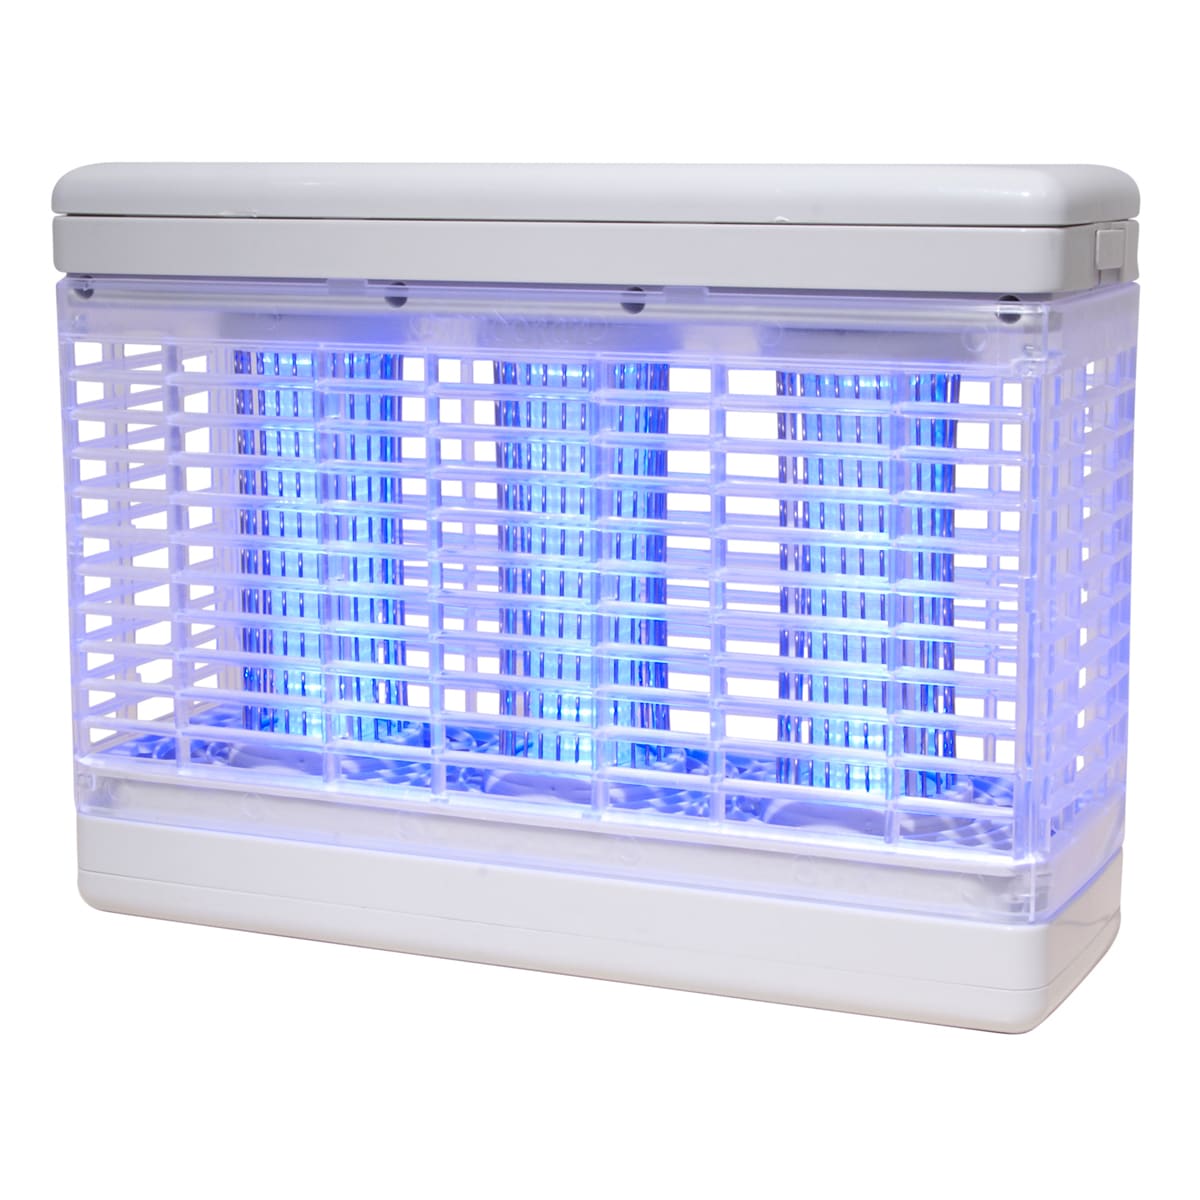 DUAL-FUNCTION LED ELECTRO-INSECTICIDE